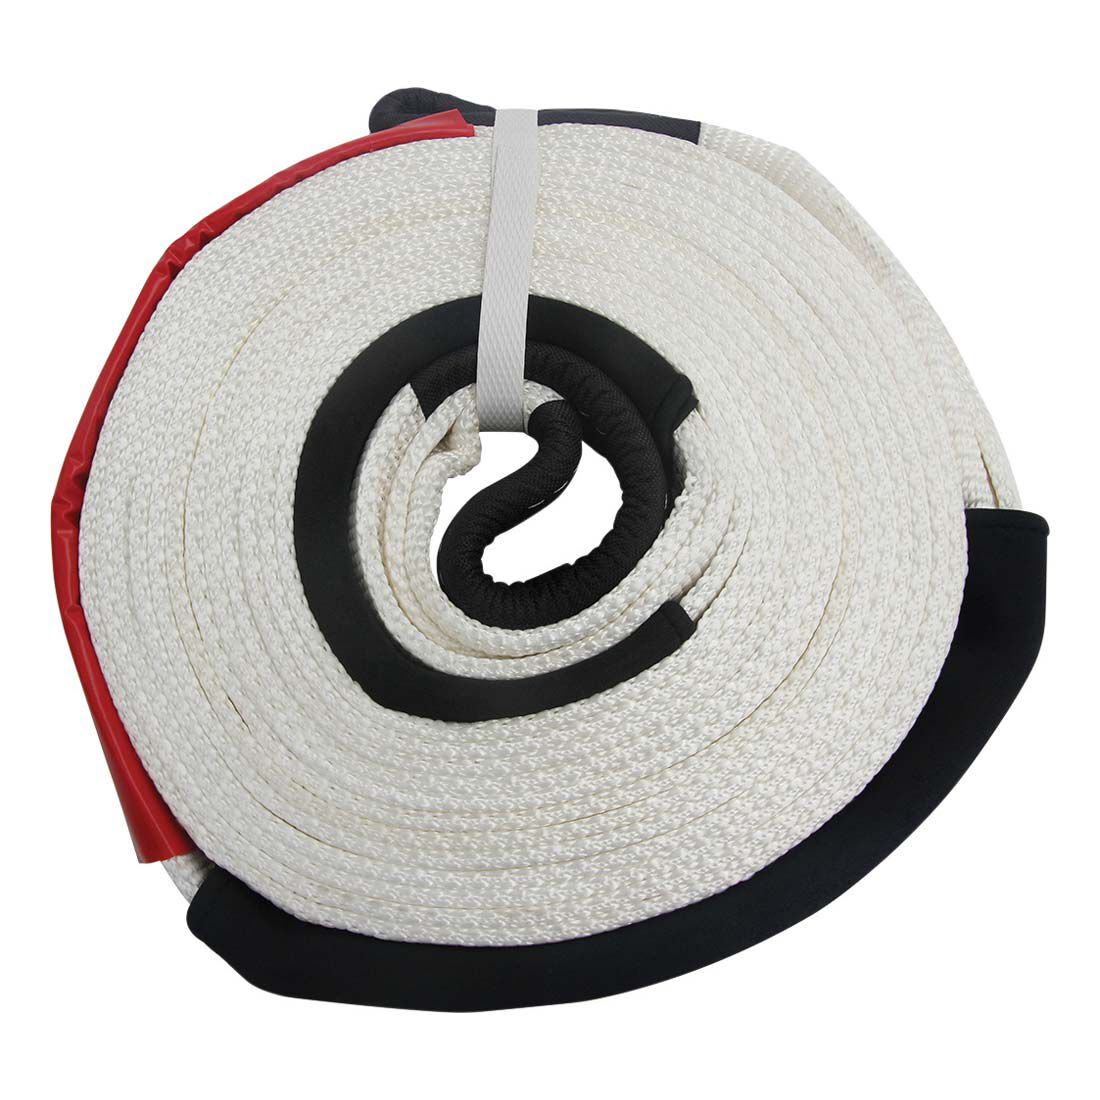 8m x75mm DiversityWrap 8T Tow Strap Single layer Heavy Duty Tow Rope Towing Pull Strap Recovery Winch 4x4 Offroad 